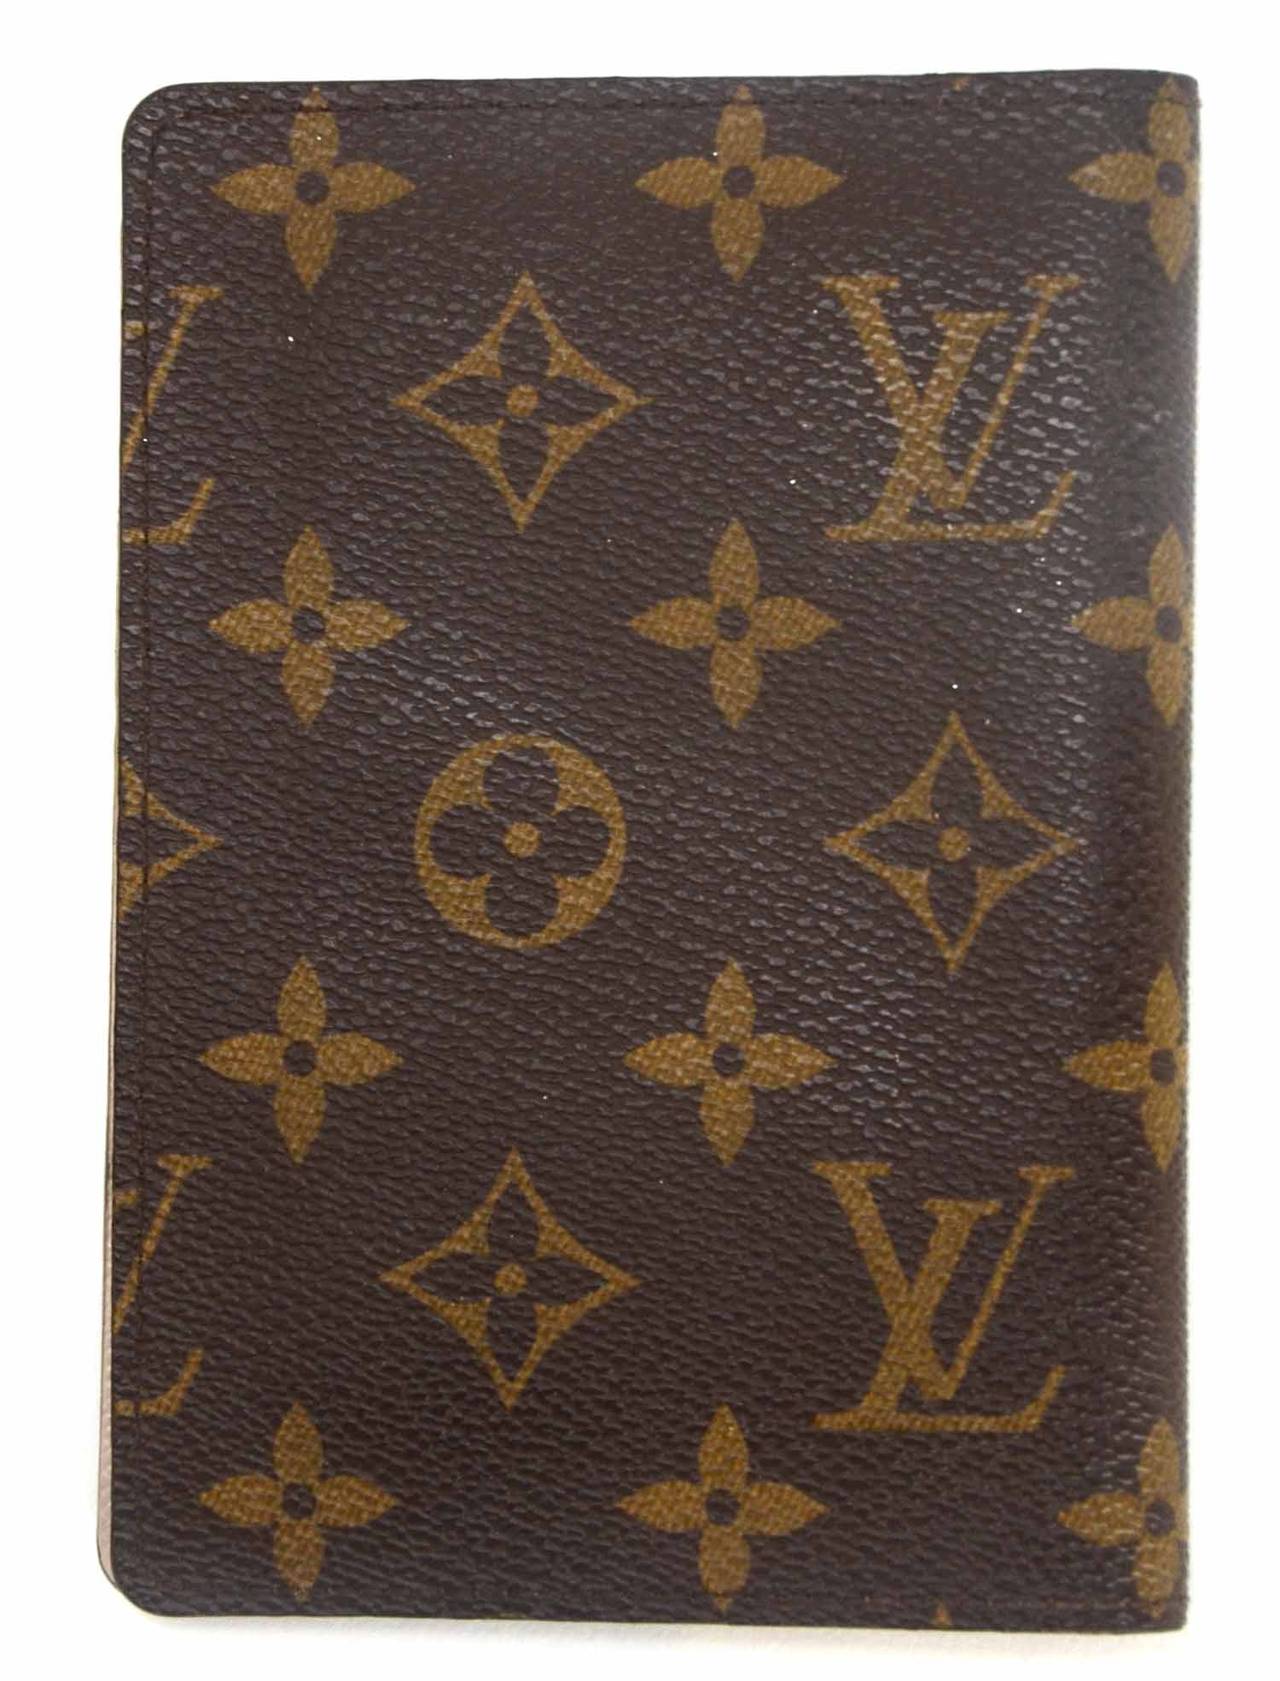 LOUIS VUITTON Monogram Limited Edition Trunks and Locks Passport Cover c.'13